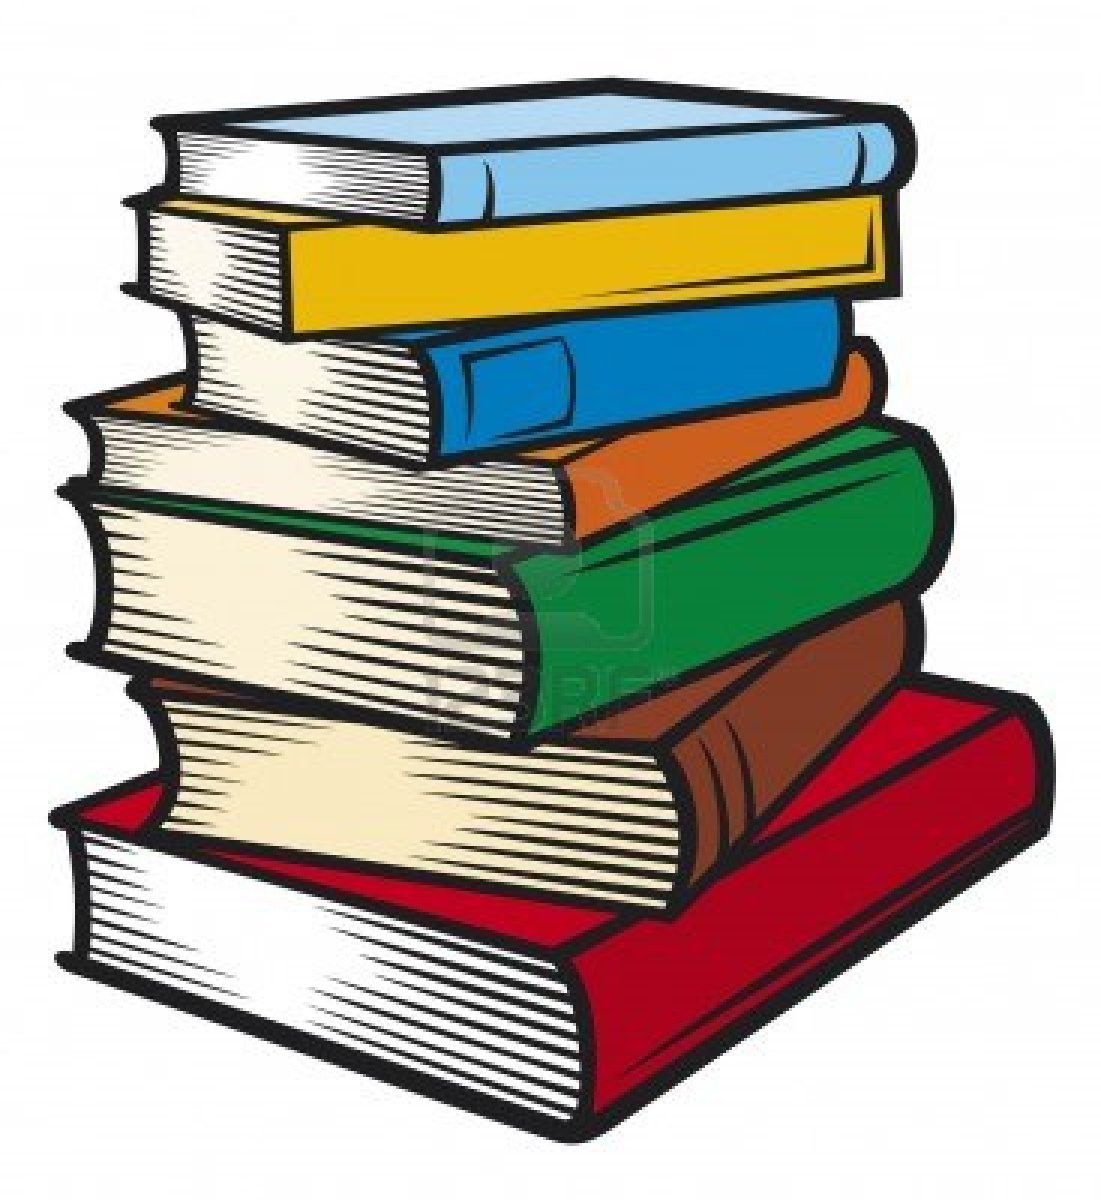 How to draw a stack of books | Clipart library - Free Clipart Images